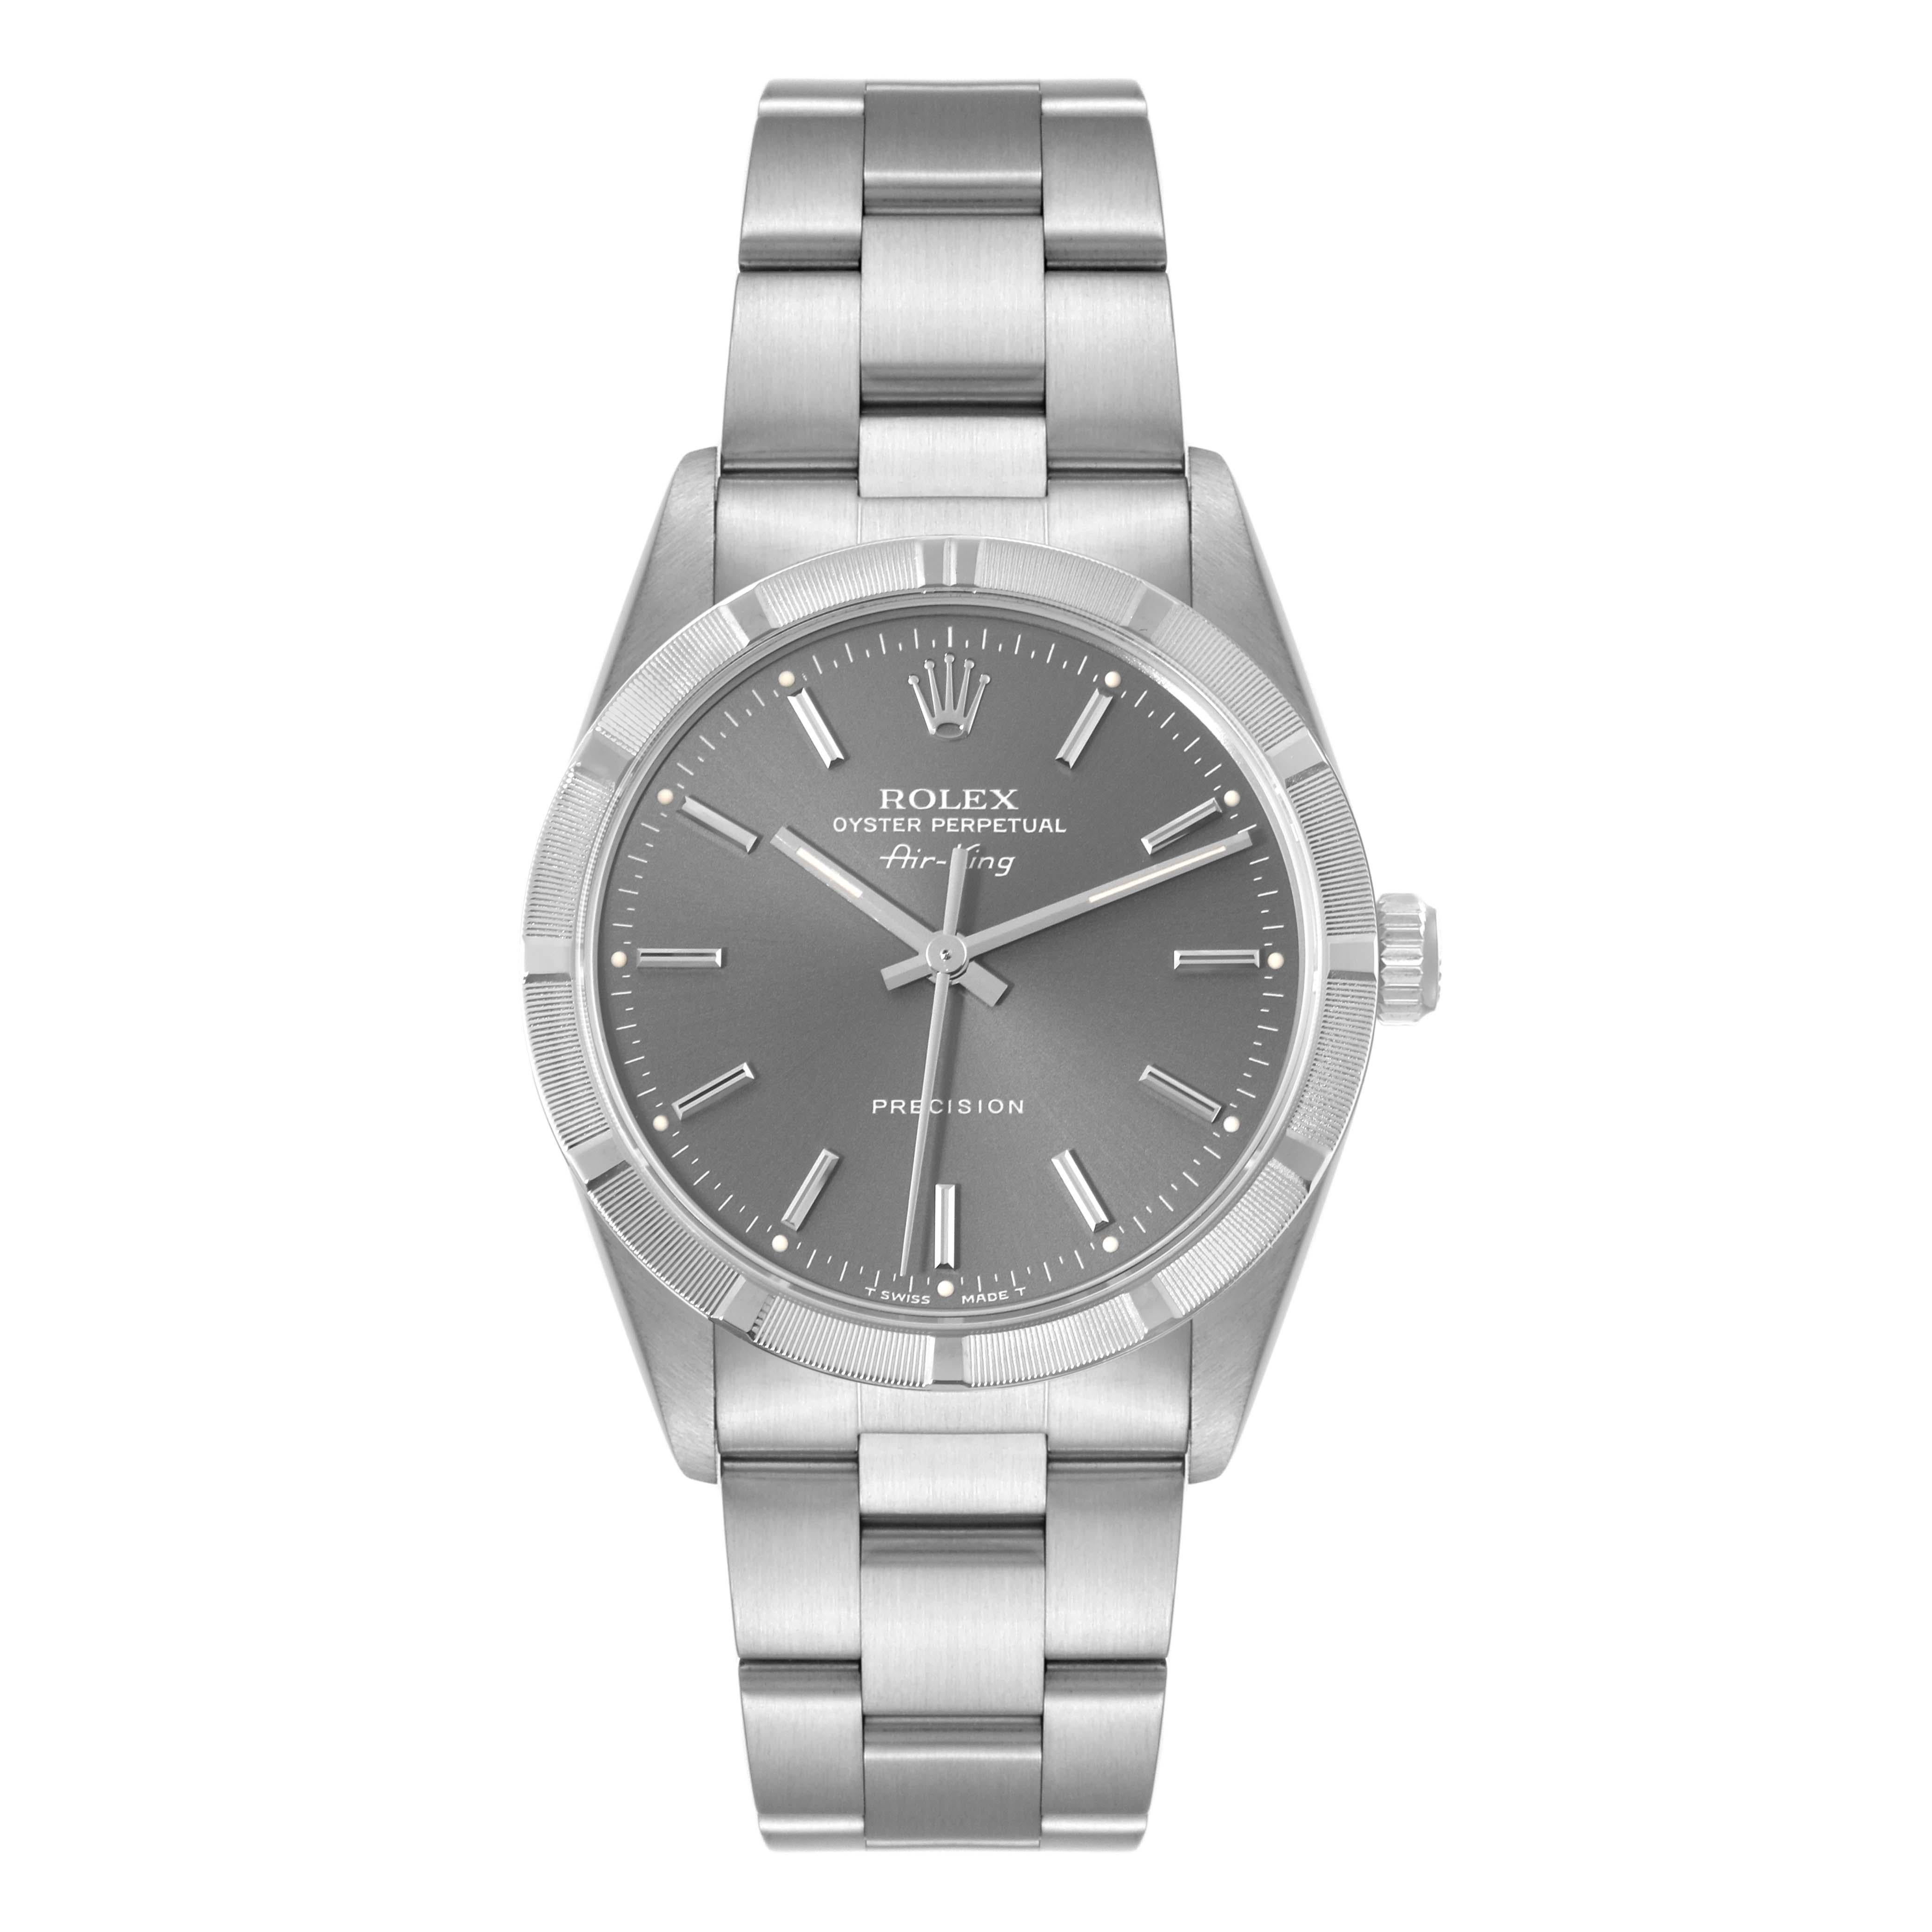 Rolex Air King Grey Dial Engine Turned Bezel Steel Mens Watch 14010. Automatic self-winding movement. Stainless steel case 34.0 mm in diameter. Rolex logo on the crown. Stainless steel engine turned bezel. Scratch resistant sapphire crystal. Grey